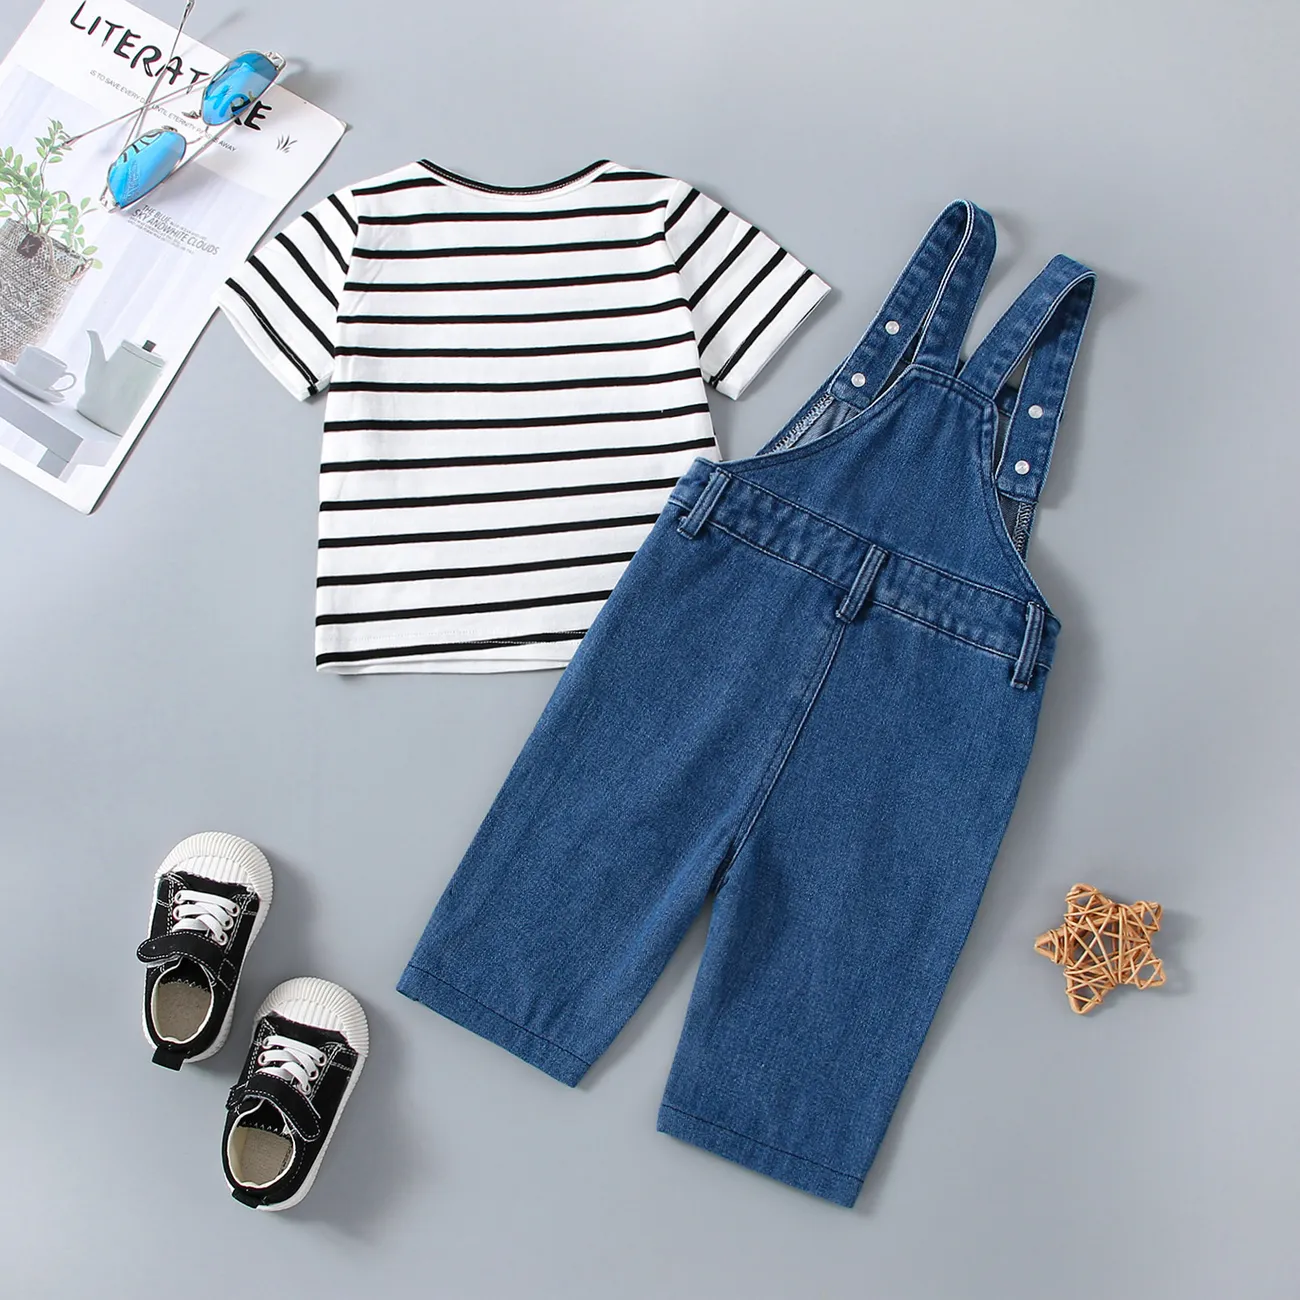 2pcs Baby Boy/Girl Short-sleeve Striped Tee and Ripped Denim Overalls Set Blue big image 1